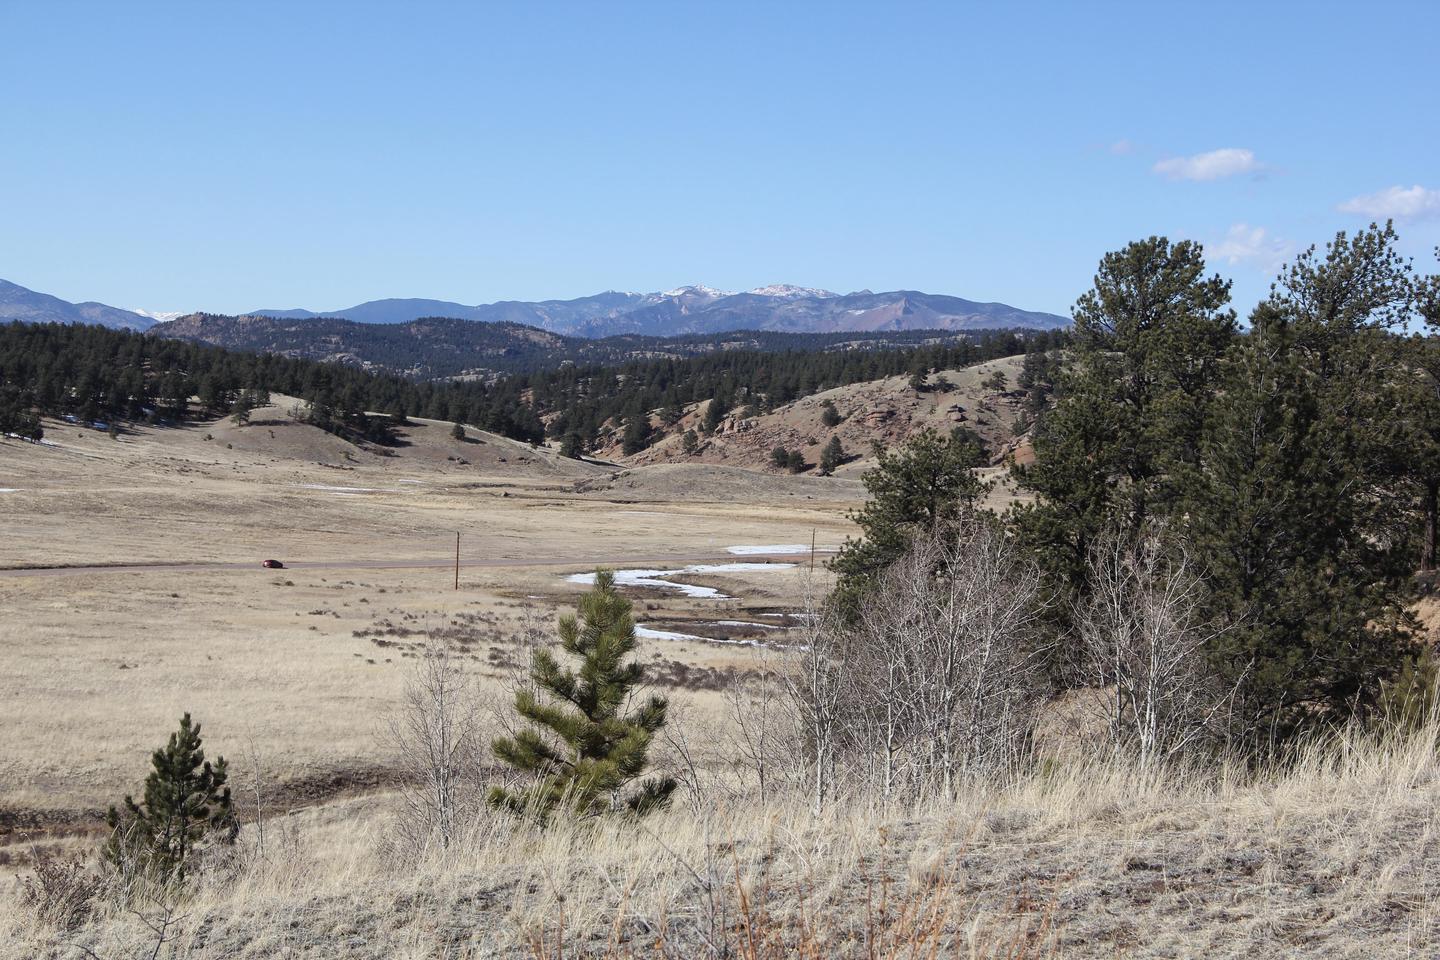 Preview photo of Florissant Fossil Beds National Monument